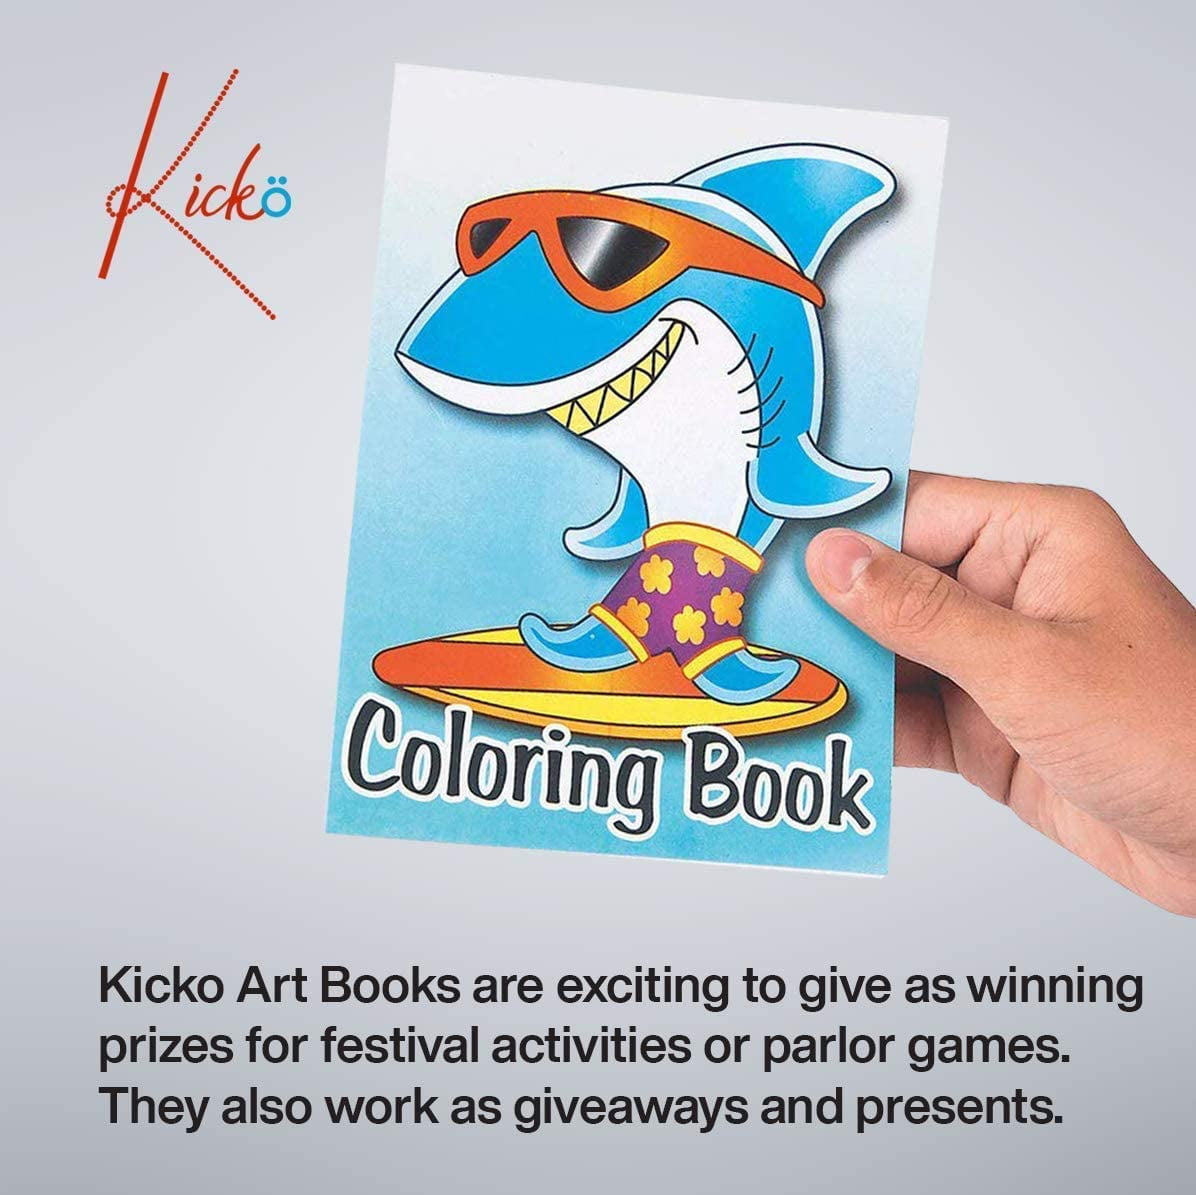 Kicko Mini Coloring Book - 12 Pieces of Assorted Activity Sheets - 6 Pages Each